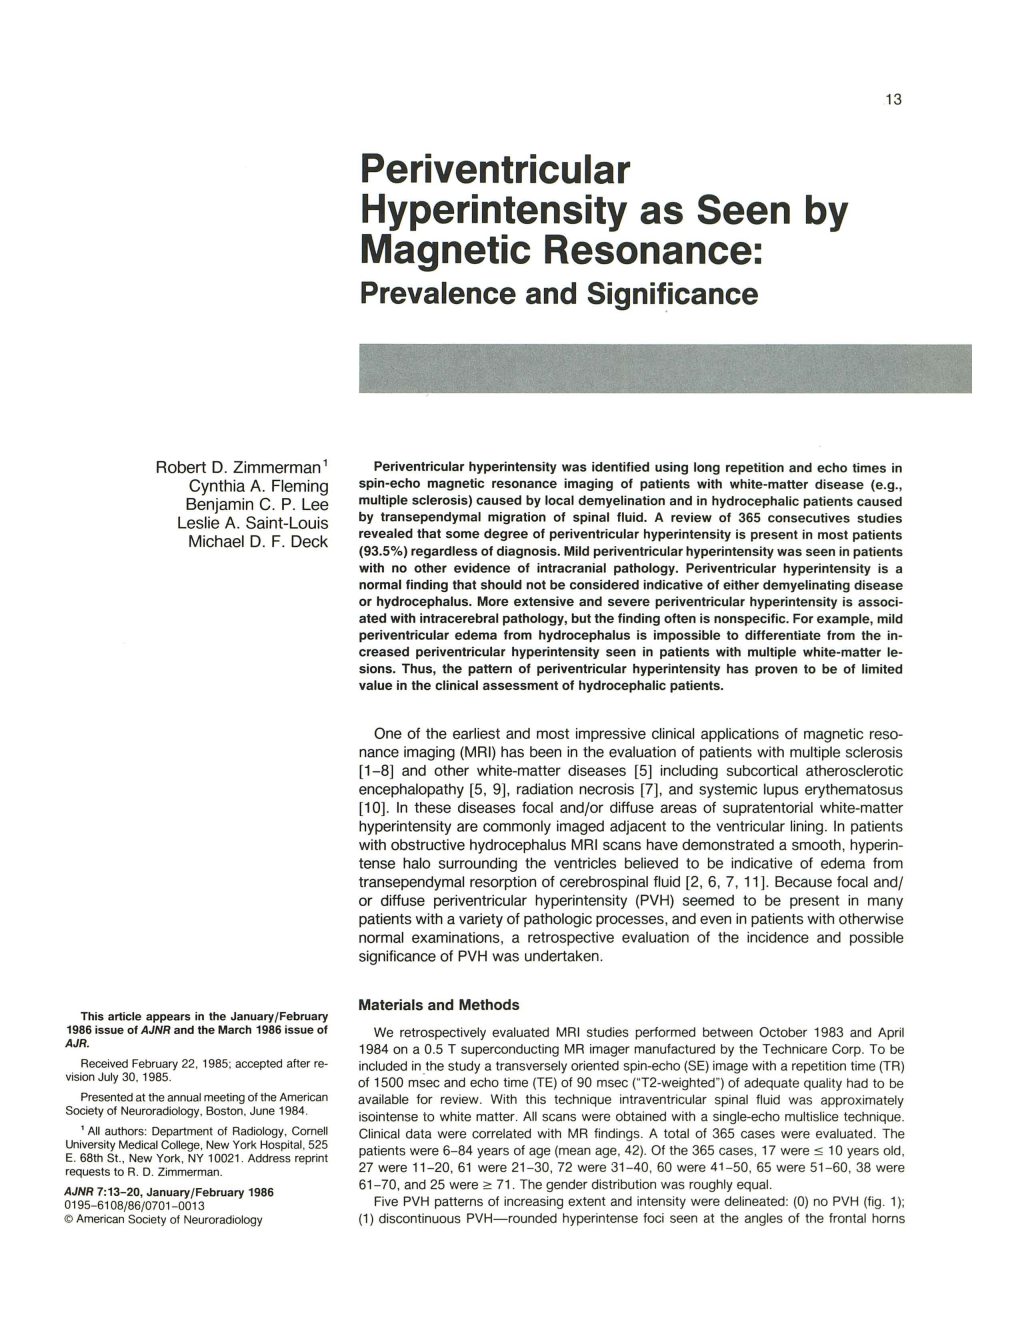 Periventricular Hyperintensity As Seen by Magnetic Resonance: Prevalence and Signif.Icance